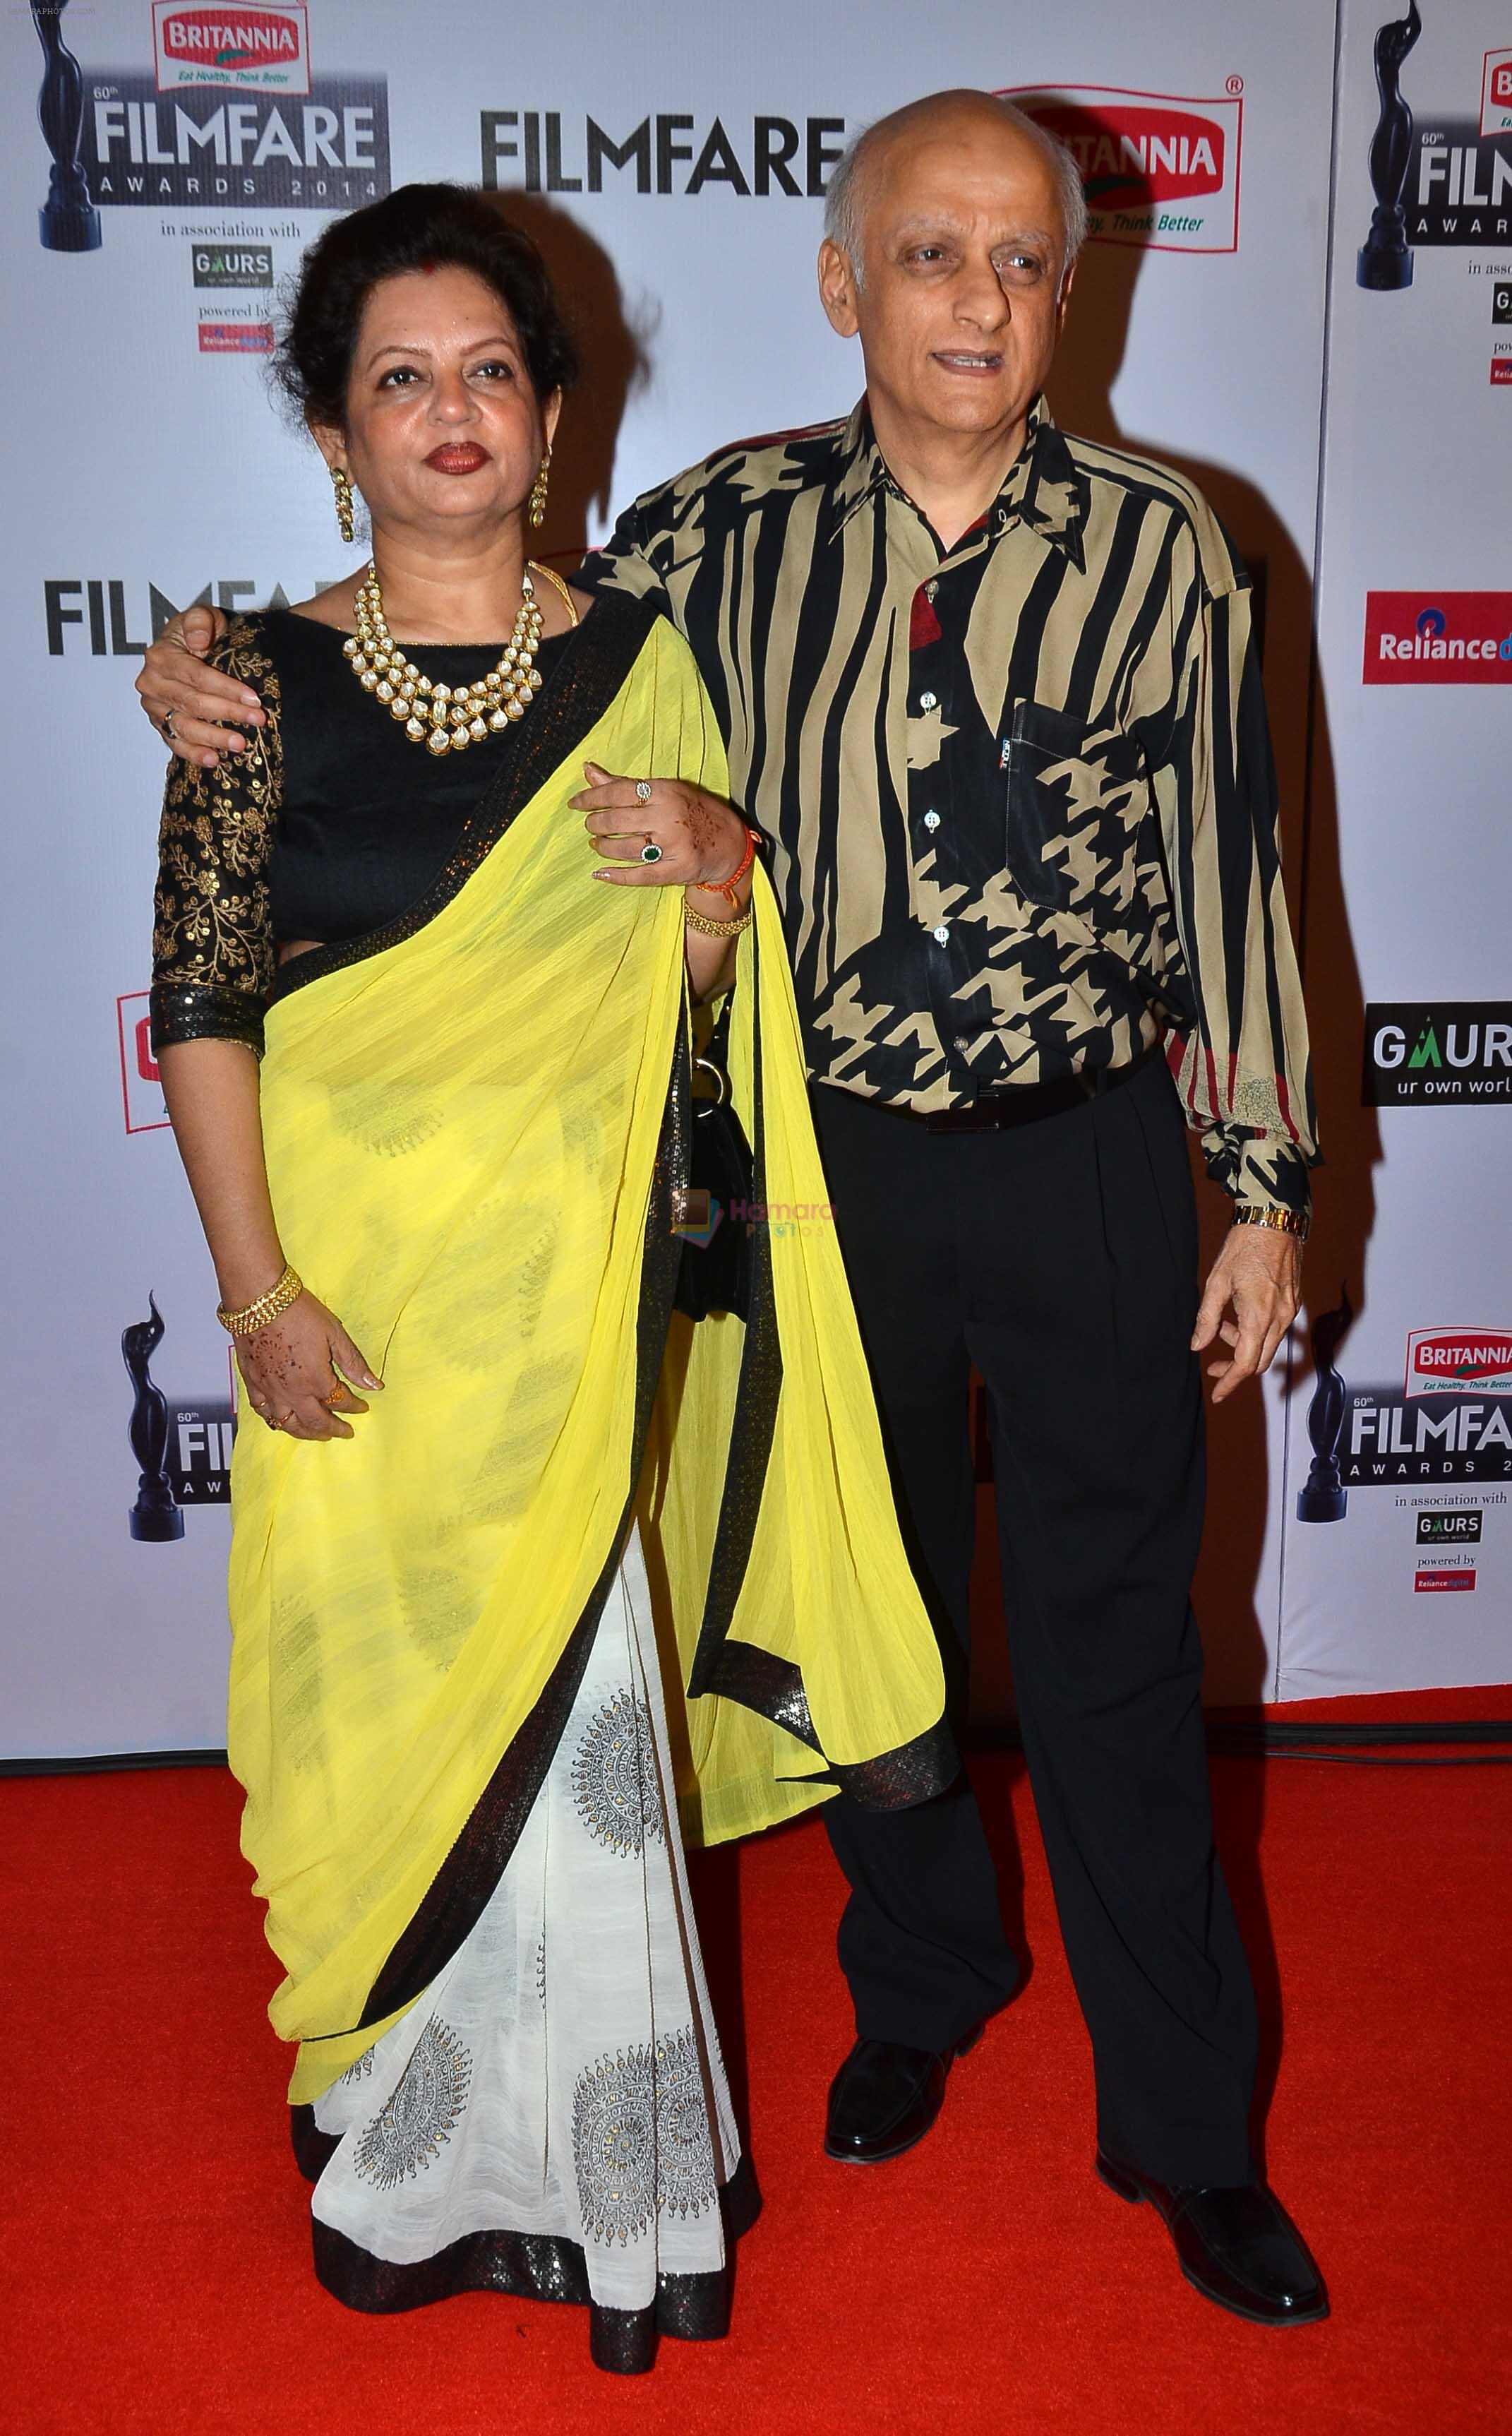 Mukesh Bhatt poses with his wife graces the red carpet at the 60th Britannia Filmfare Awards